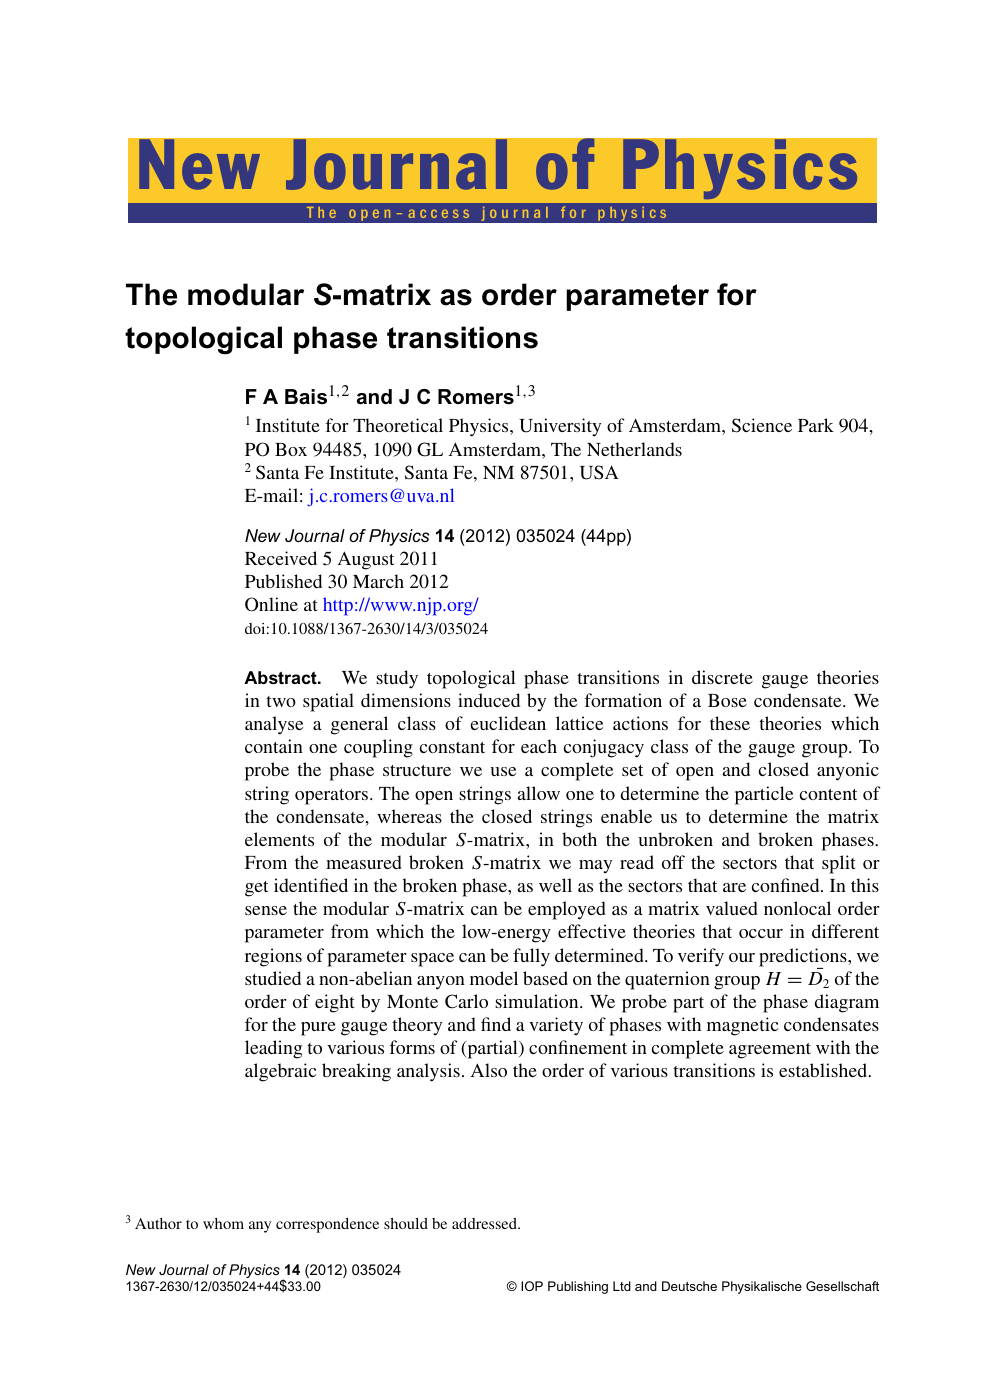 The Modular S Matrix As Order Parameter For Topological Phase Transitions Topic Of Research Paper In Physical Sciences Download Scholarly Article Pdf And Read For Free On Cyberleninka Open Science Hub